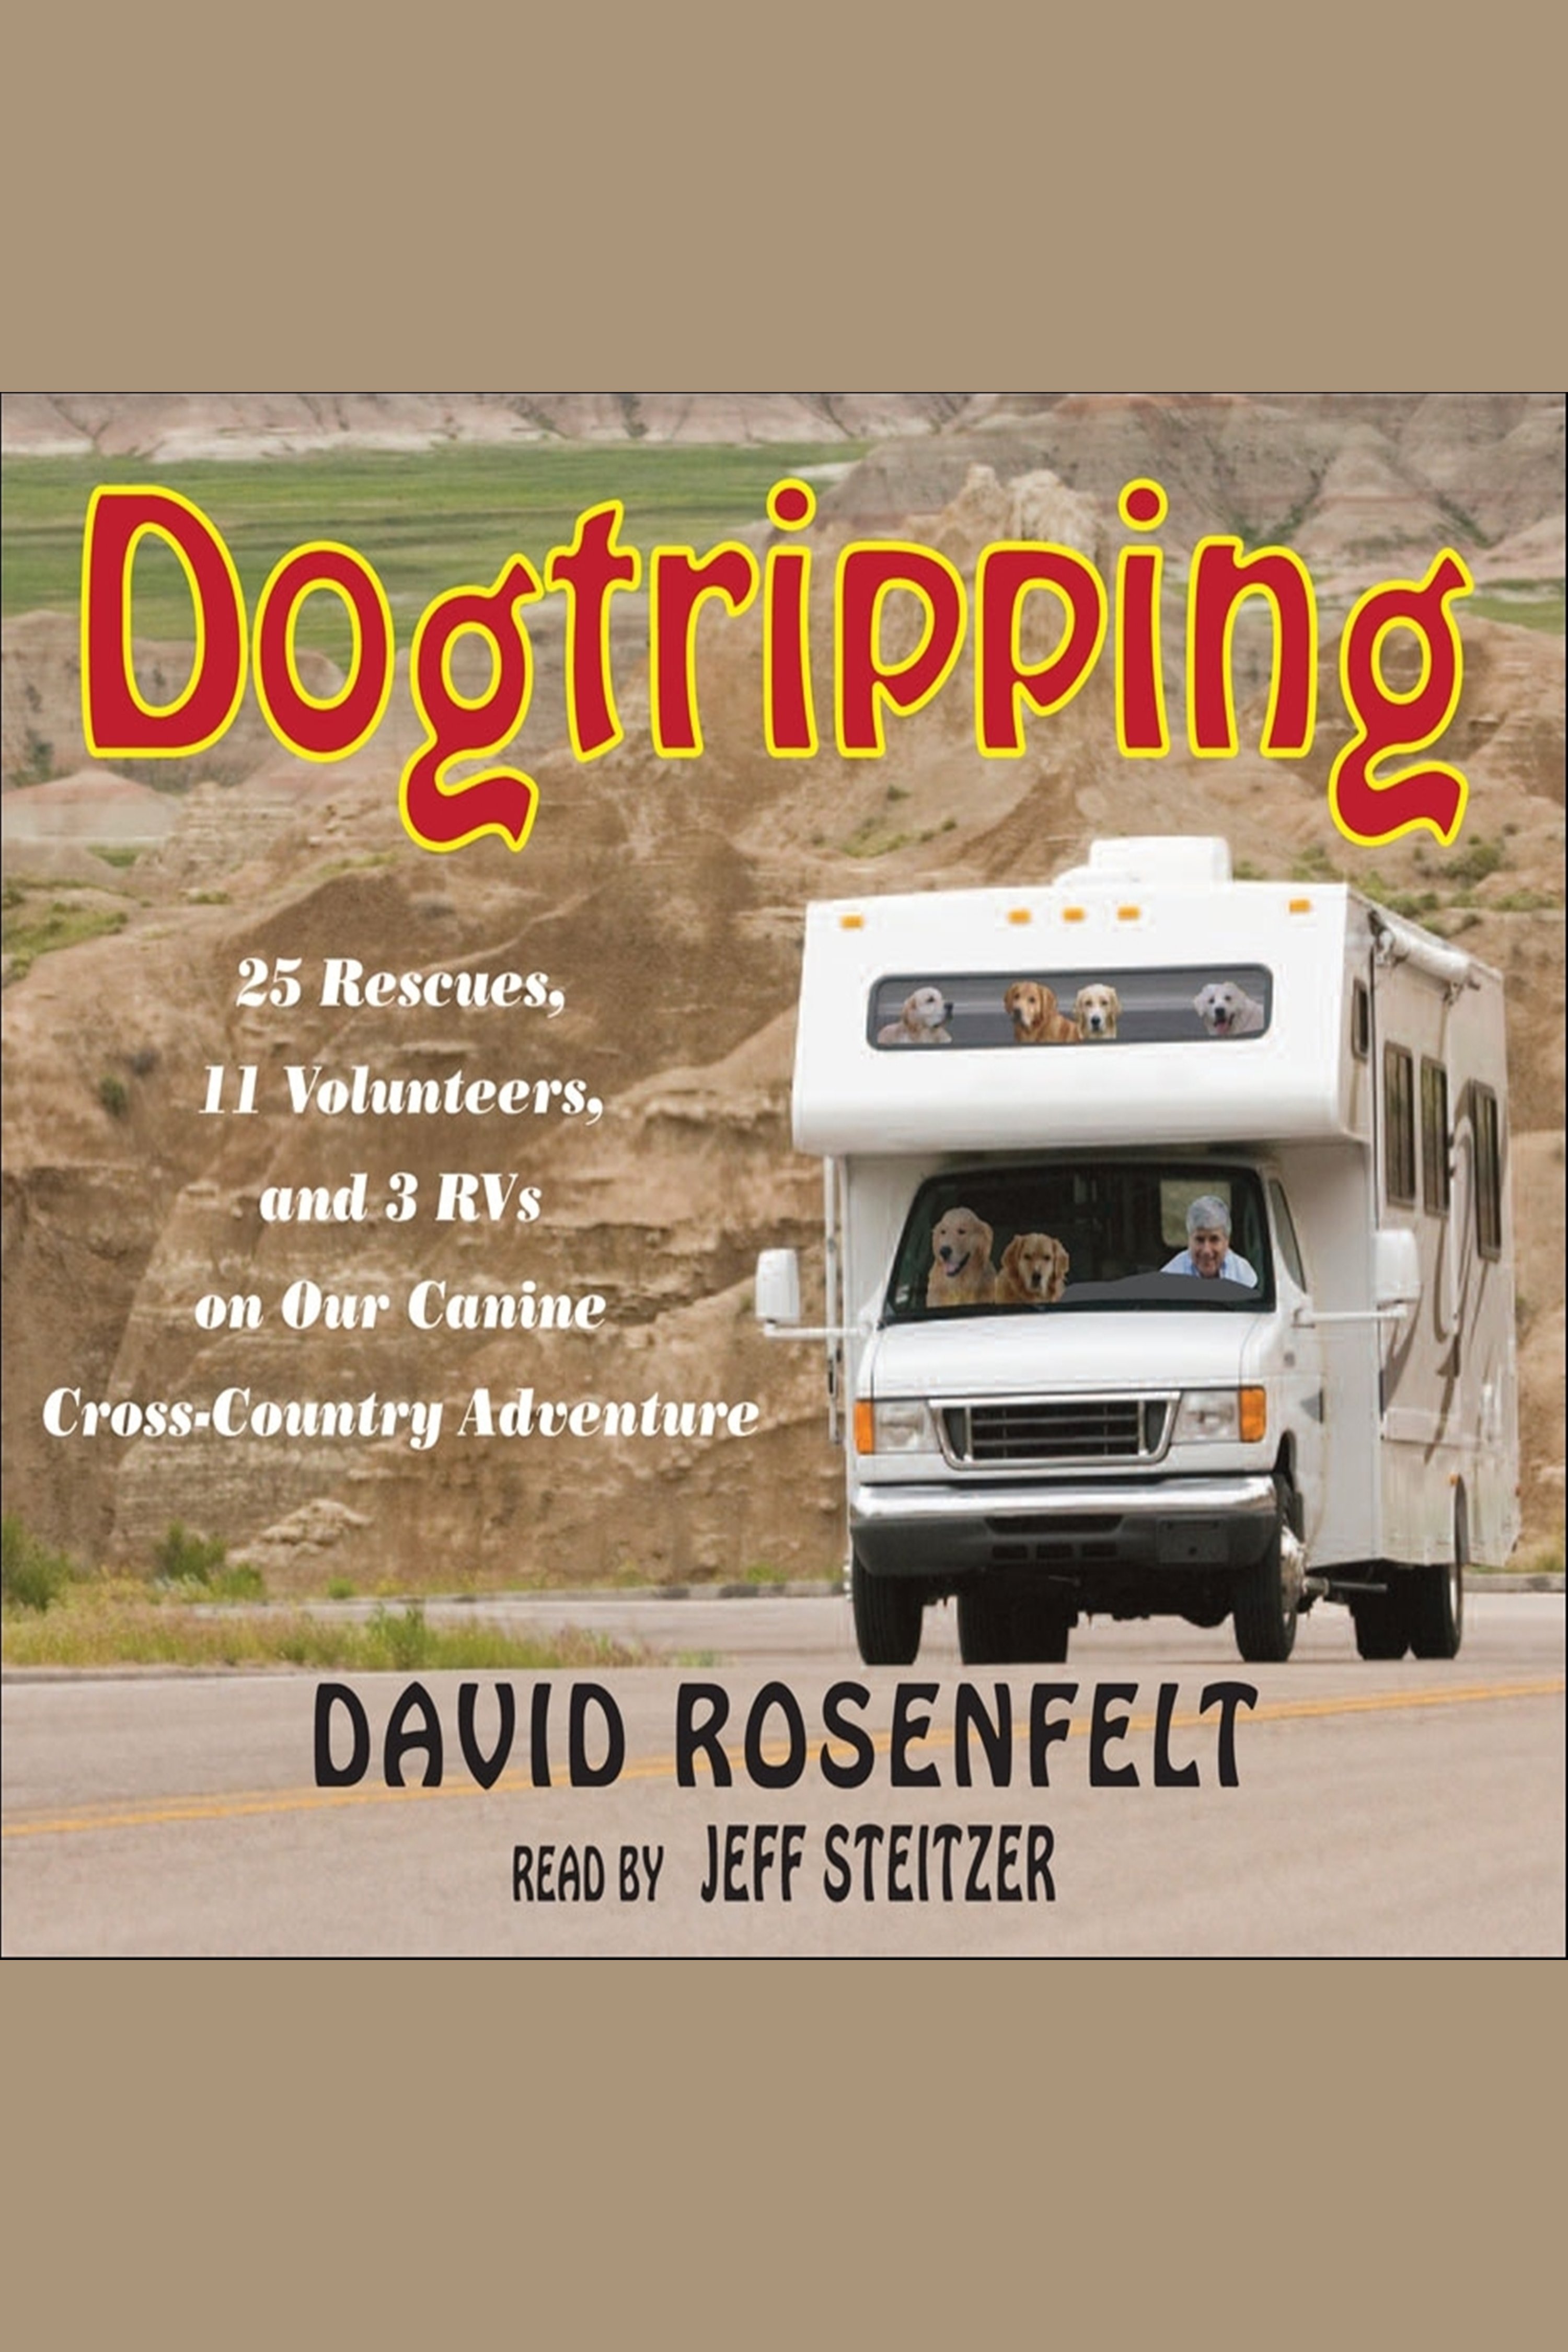 Umschlagbild für Dogtripping [electronic resource] : 25 Rescues, 11 Volunteers, and 3 RVs on Our Canine Cross-Country Adventure